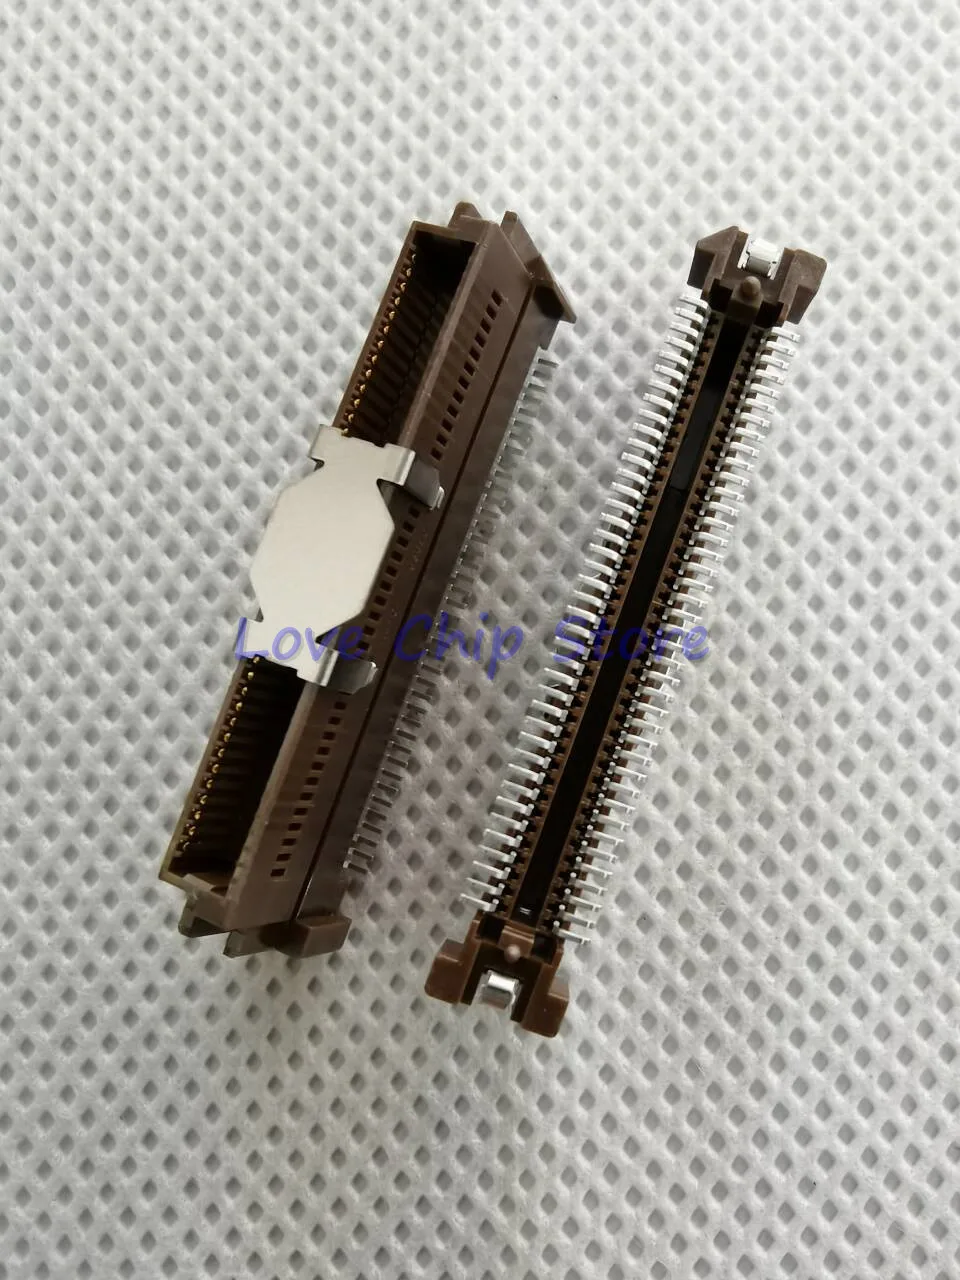 53627-0874 536270874 0536270874 Spacing 0.64MM CON 80pin connector New and Original